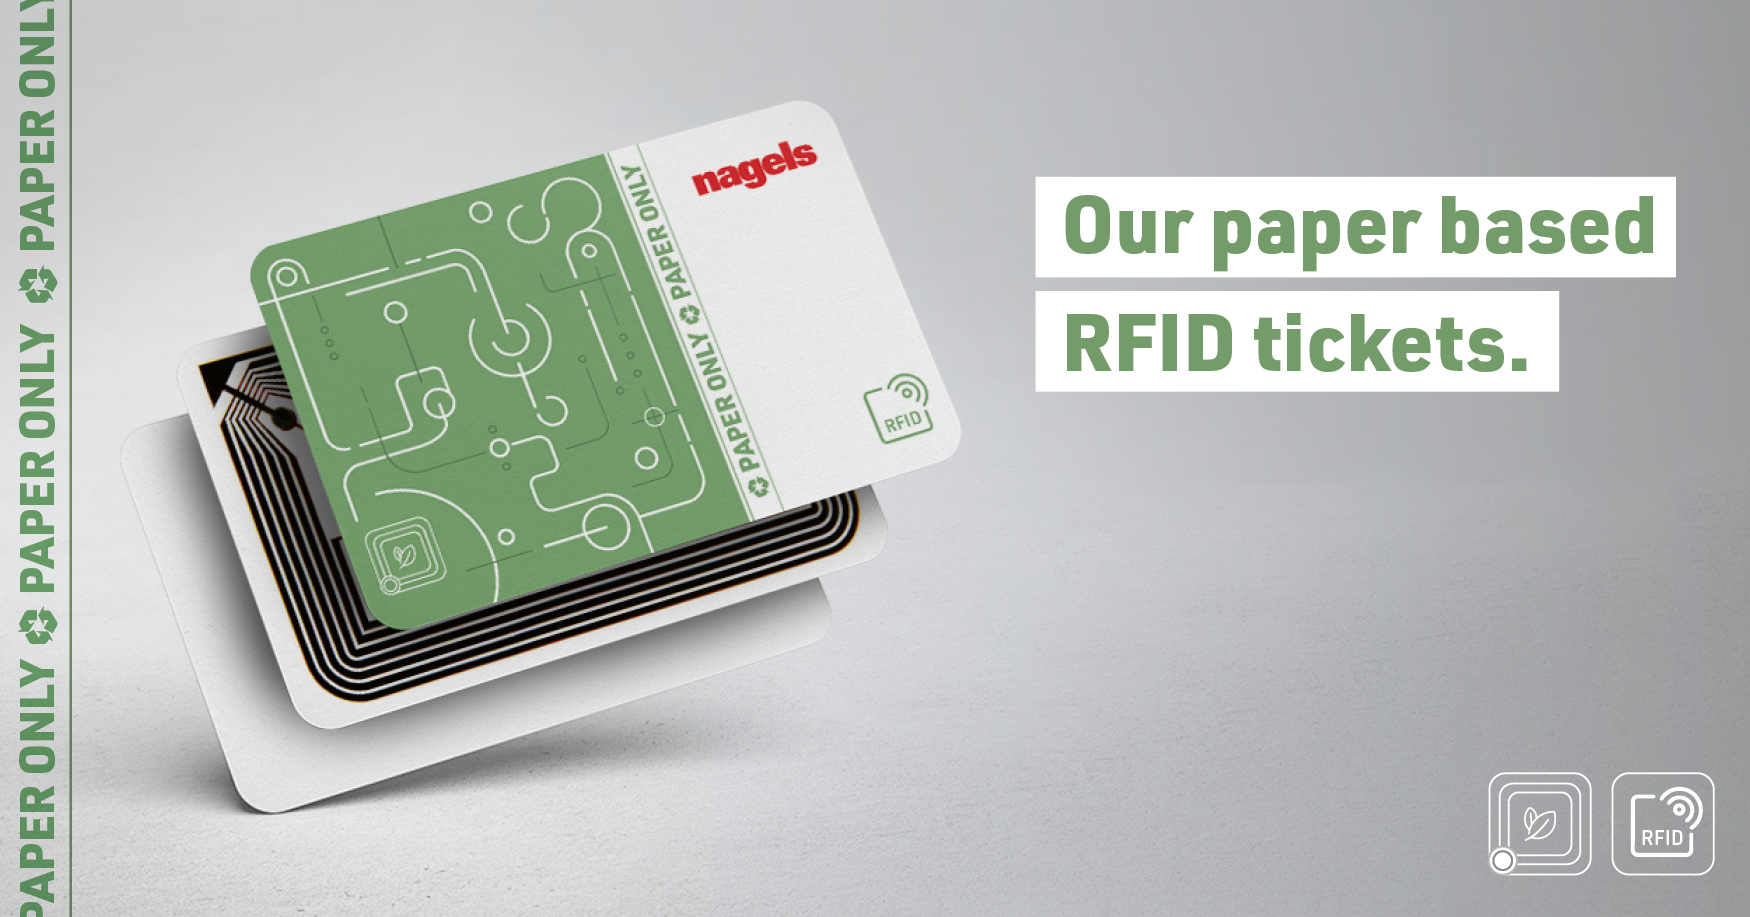 Our new RFID Tickets are completely made of paper, avoiding PET material usage and combining environmental consciousness.